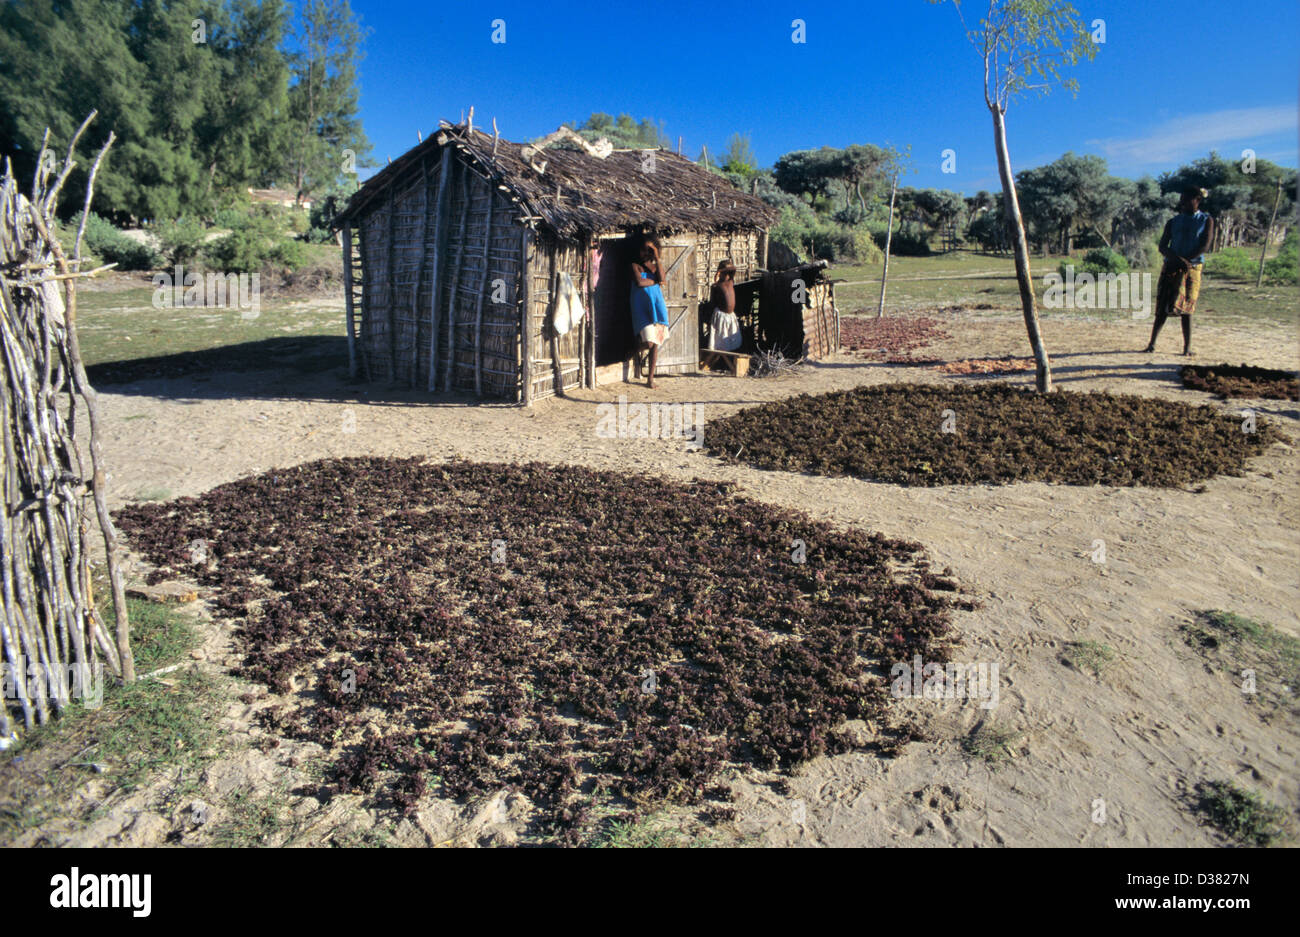 Wild Collected Seaweed Eucheuma species Drying Outside Peasant Hut or Grass Hut near Ifaty Toliara or Tulear SW Madagascar Stock Photo